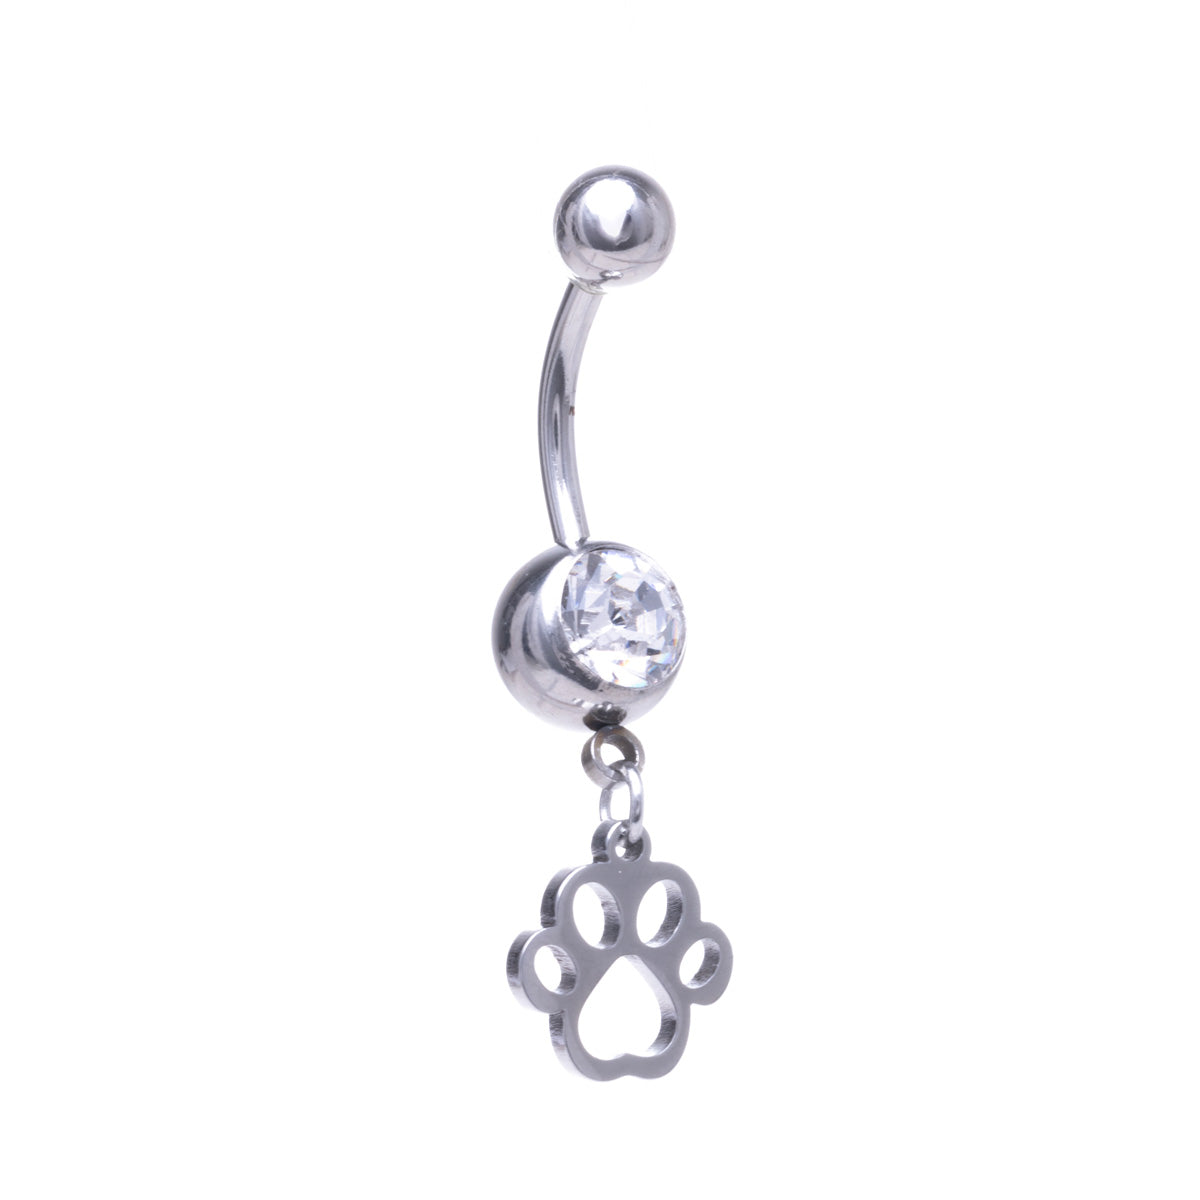 Pacifier pendant with a button earring (Steel 316L 100%)